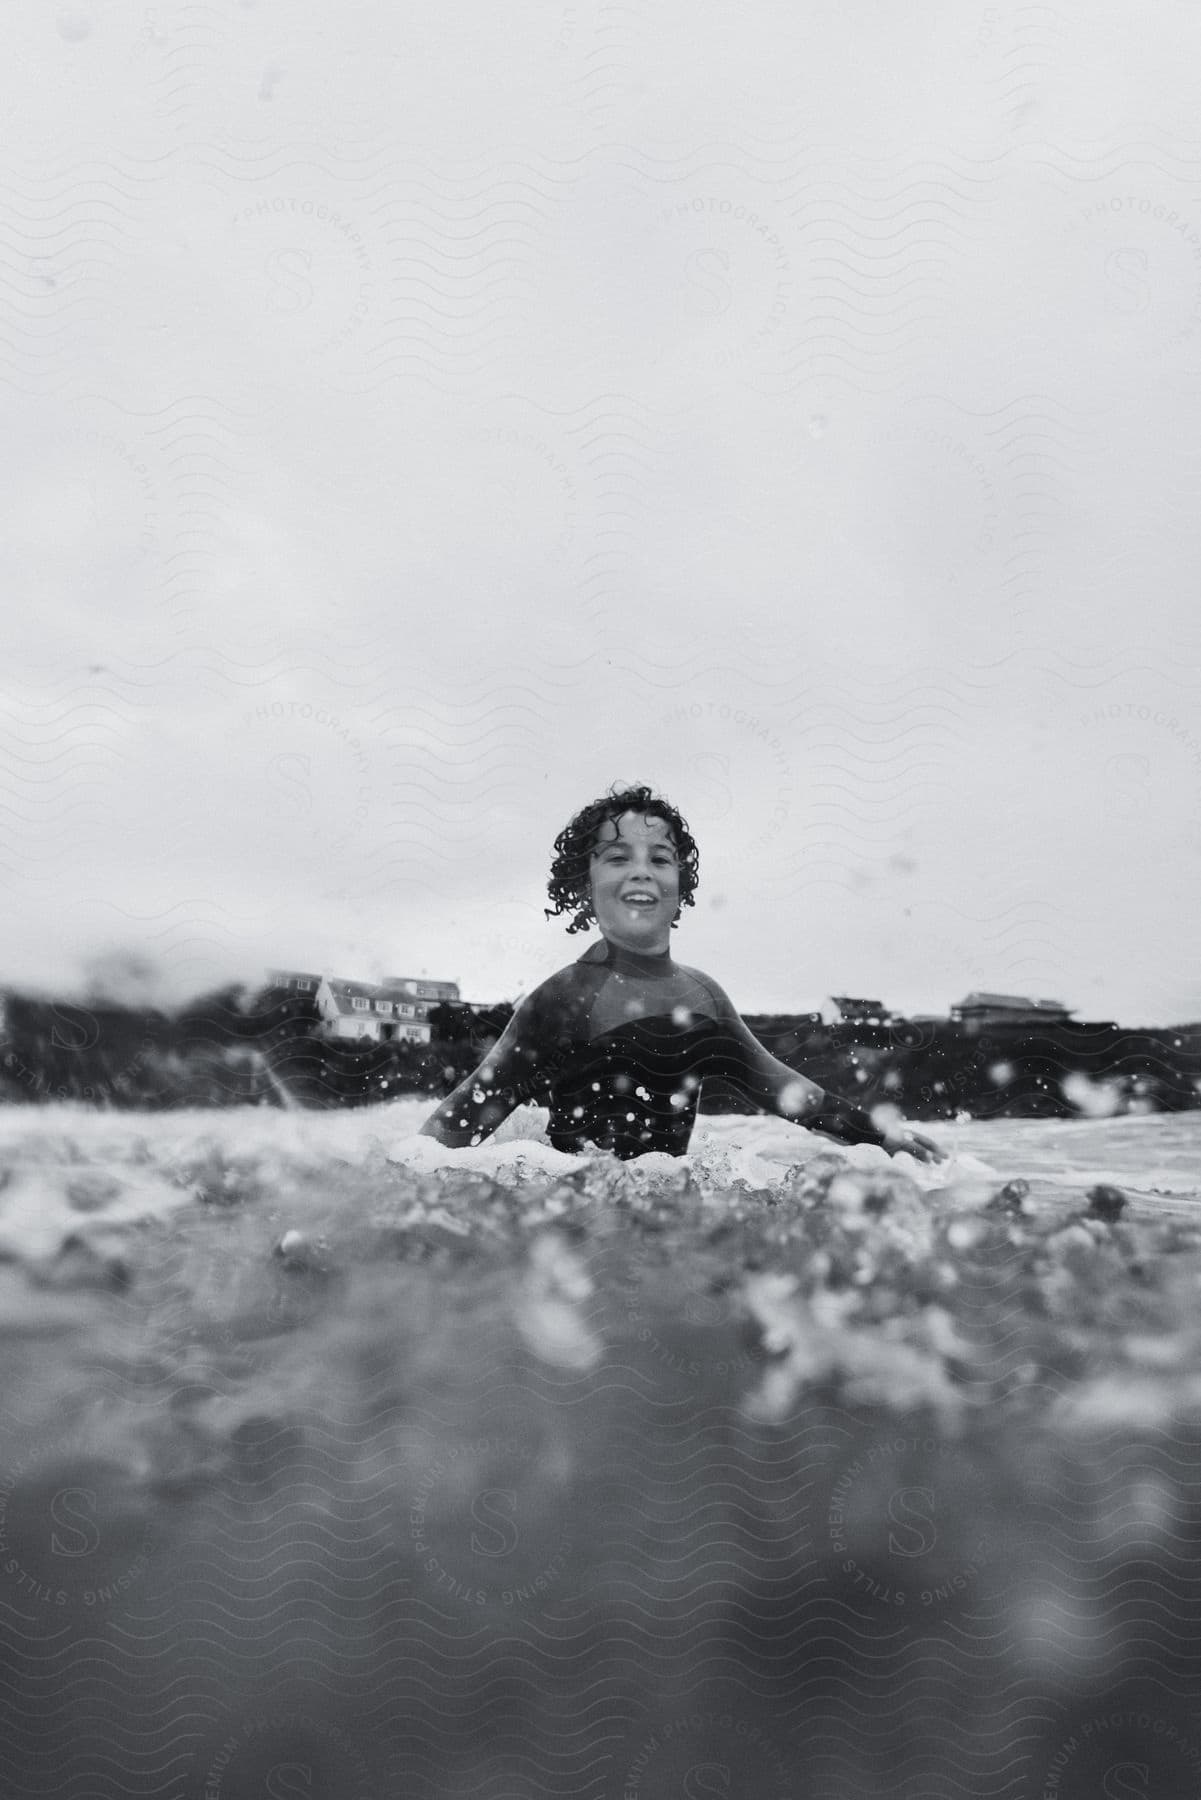 A child surfer standing in the waves in the ocean